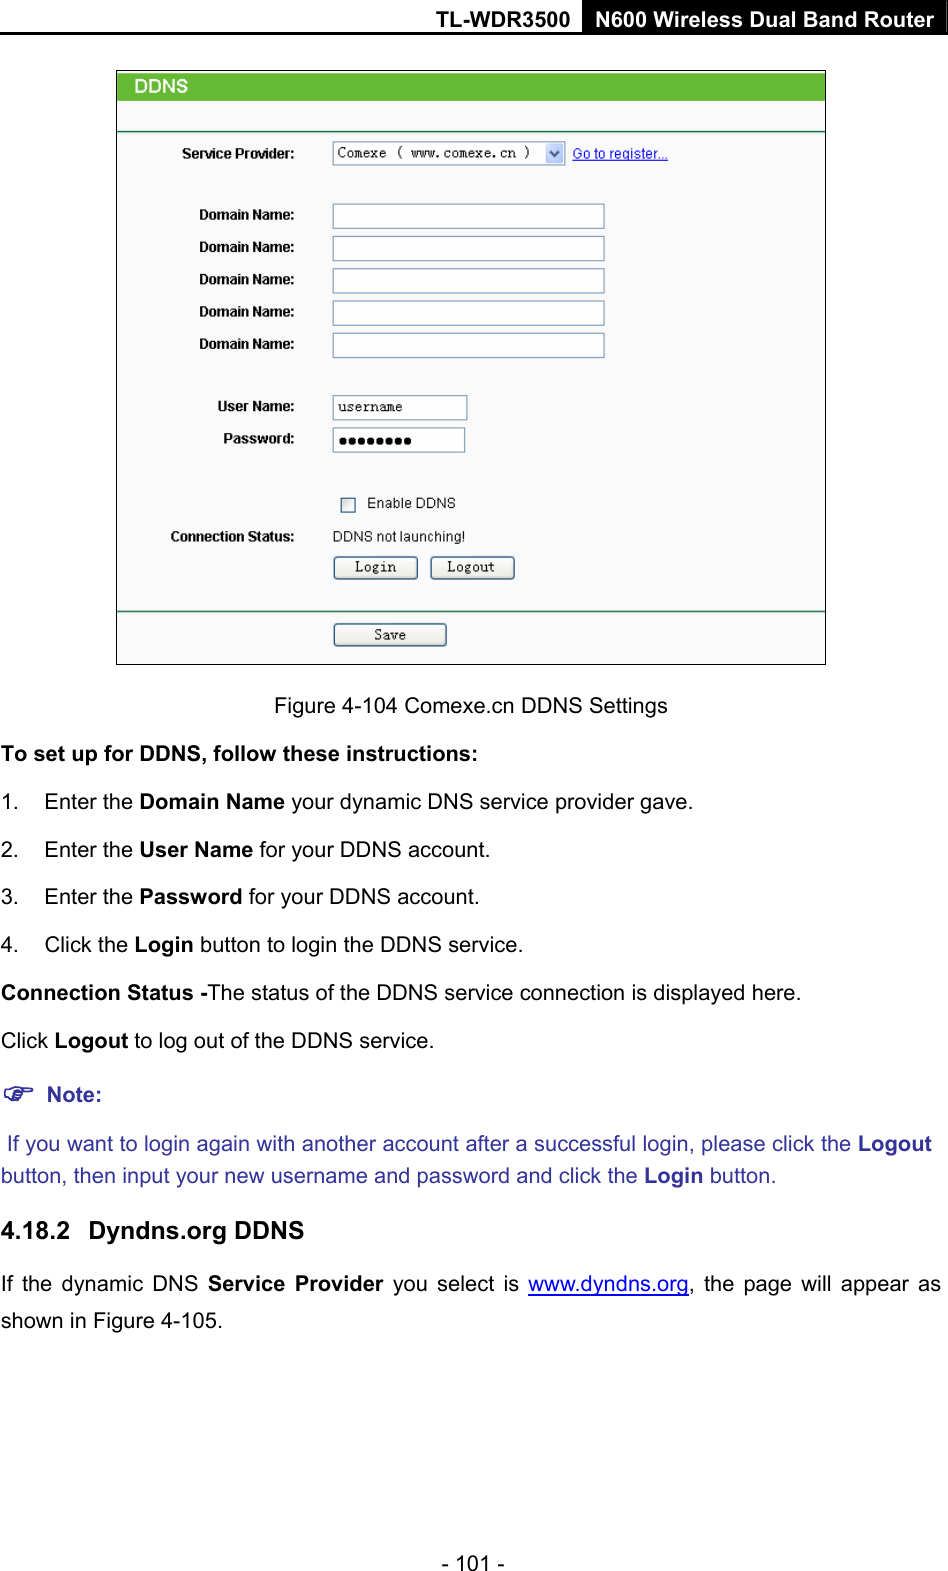 TL-WDR3500 N600 Wireless Dual Band Router - 101 -  Figure 4-104 Comexe.cn DDNS Settings To set up for DDNS, follow these instructions: 1. Enter the Domain Name your dynamic DNS service provider gave.   2. Enter the User Name for your DDNS account.   3. Enter the Password for your DDNS account.   4. Click the Login button to login the DDNS service.   Connection Status -The status of the DDNS service connection is displayed here. Click Logout to log out of the DDNS service.    Note:  If you want to login again with another account after a successful login, please click the Logout button, then input your new username and password and click the Login button. 4.18.2  Dyndns.org DDNS If the dynamic DNS Service Provider you select is www.dyndns.org, the page will appear as shown in Figure 4-105. 